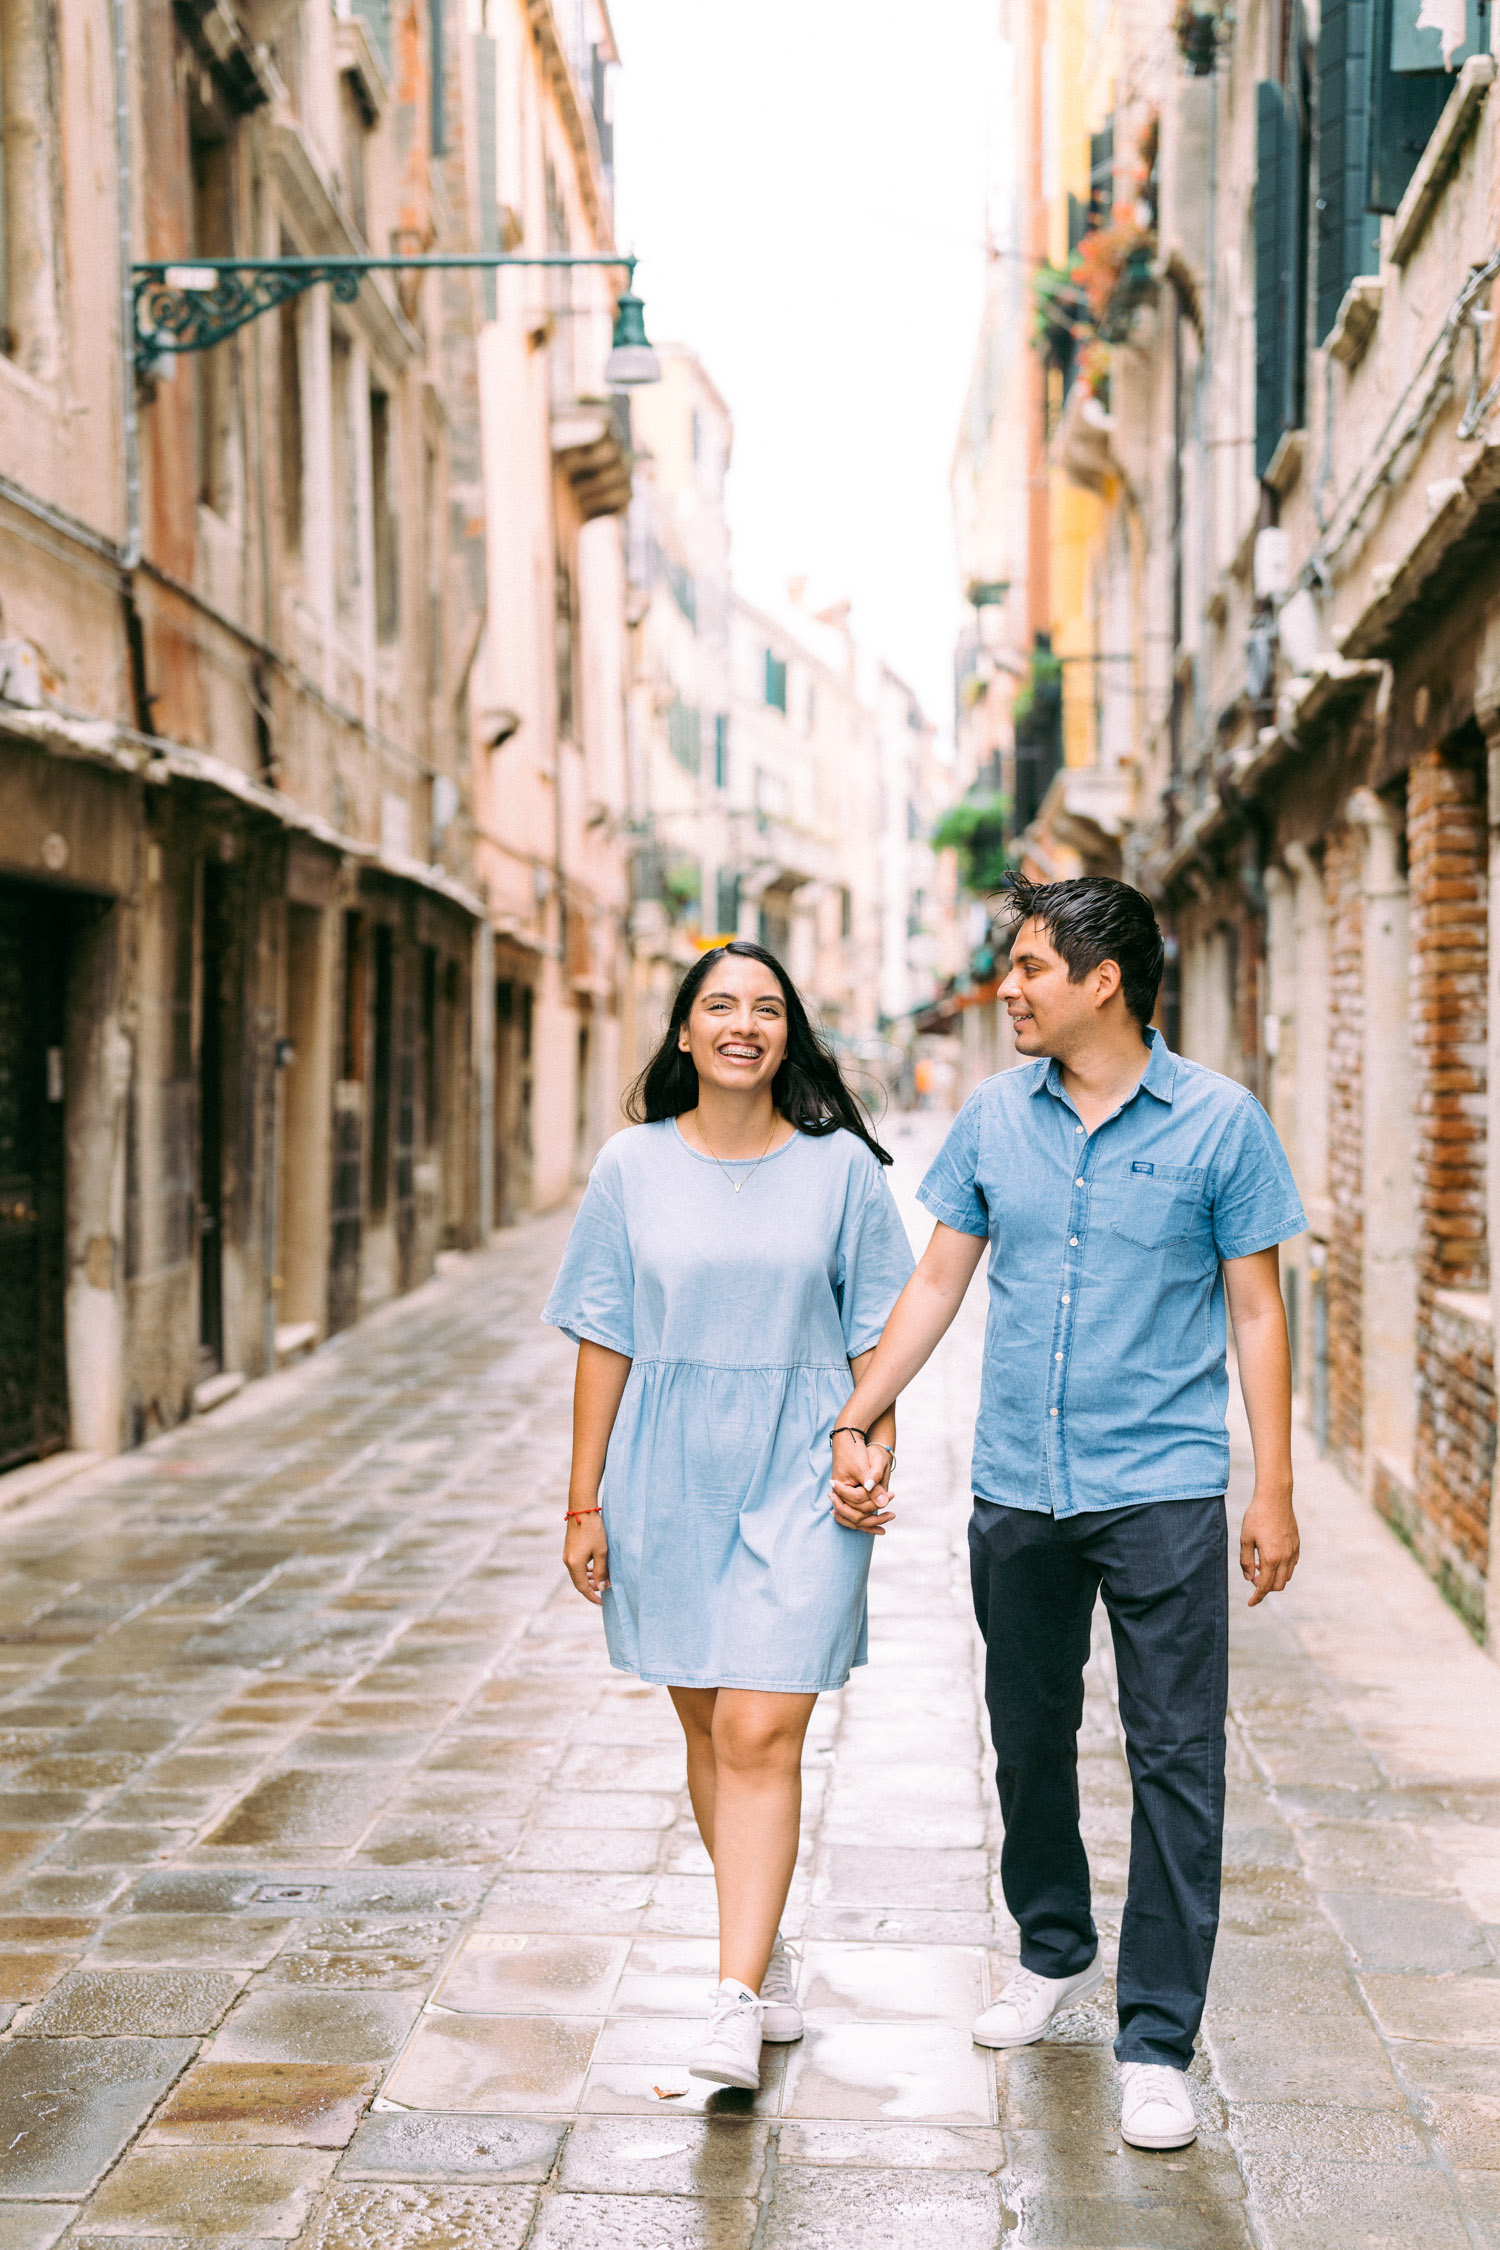 candid photos for a couple in Venice